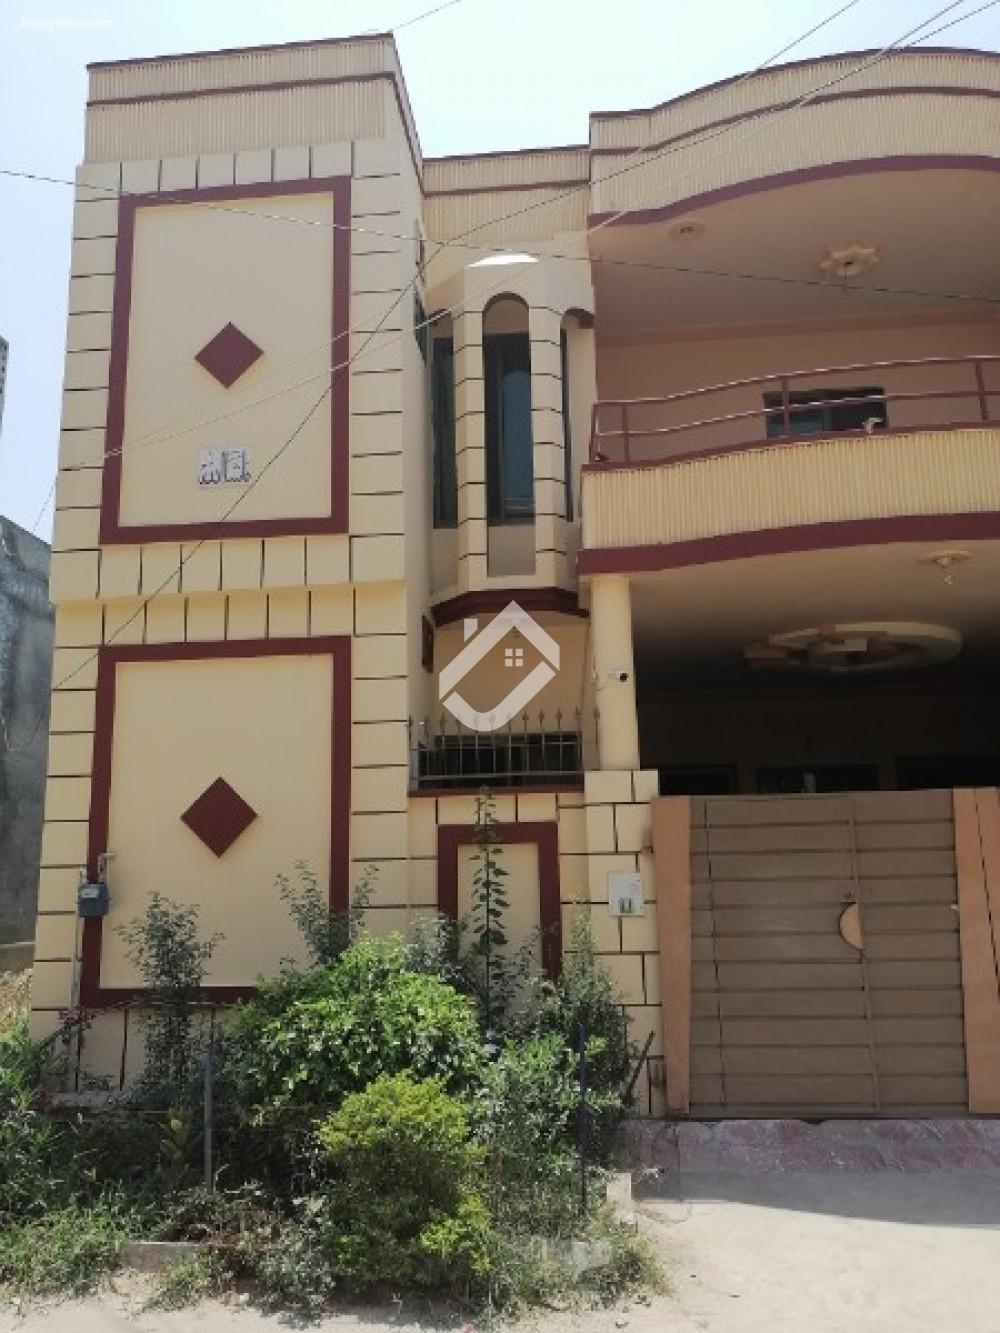 View  5.5 Marla Double Storey House For Sale In Shadab Town Sargodha in Shadab Town, Sargodha